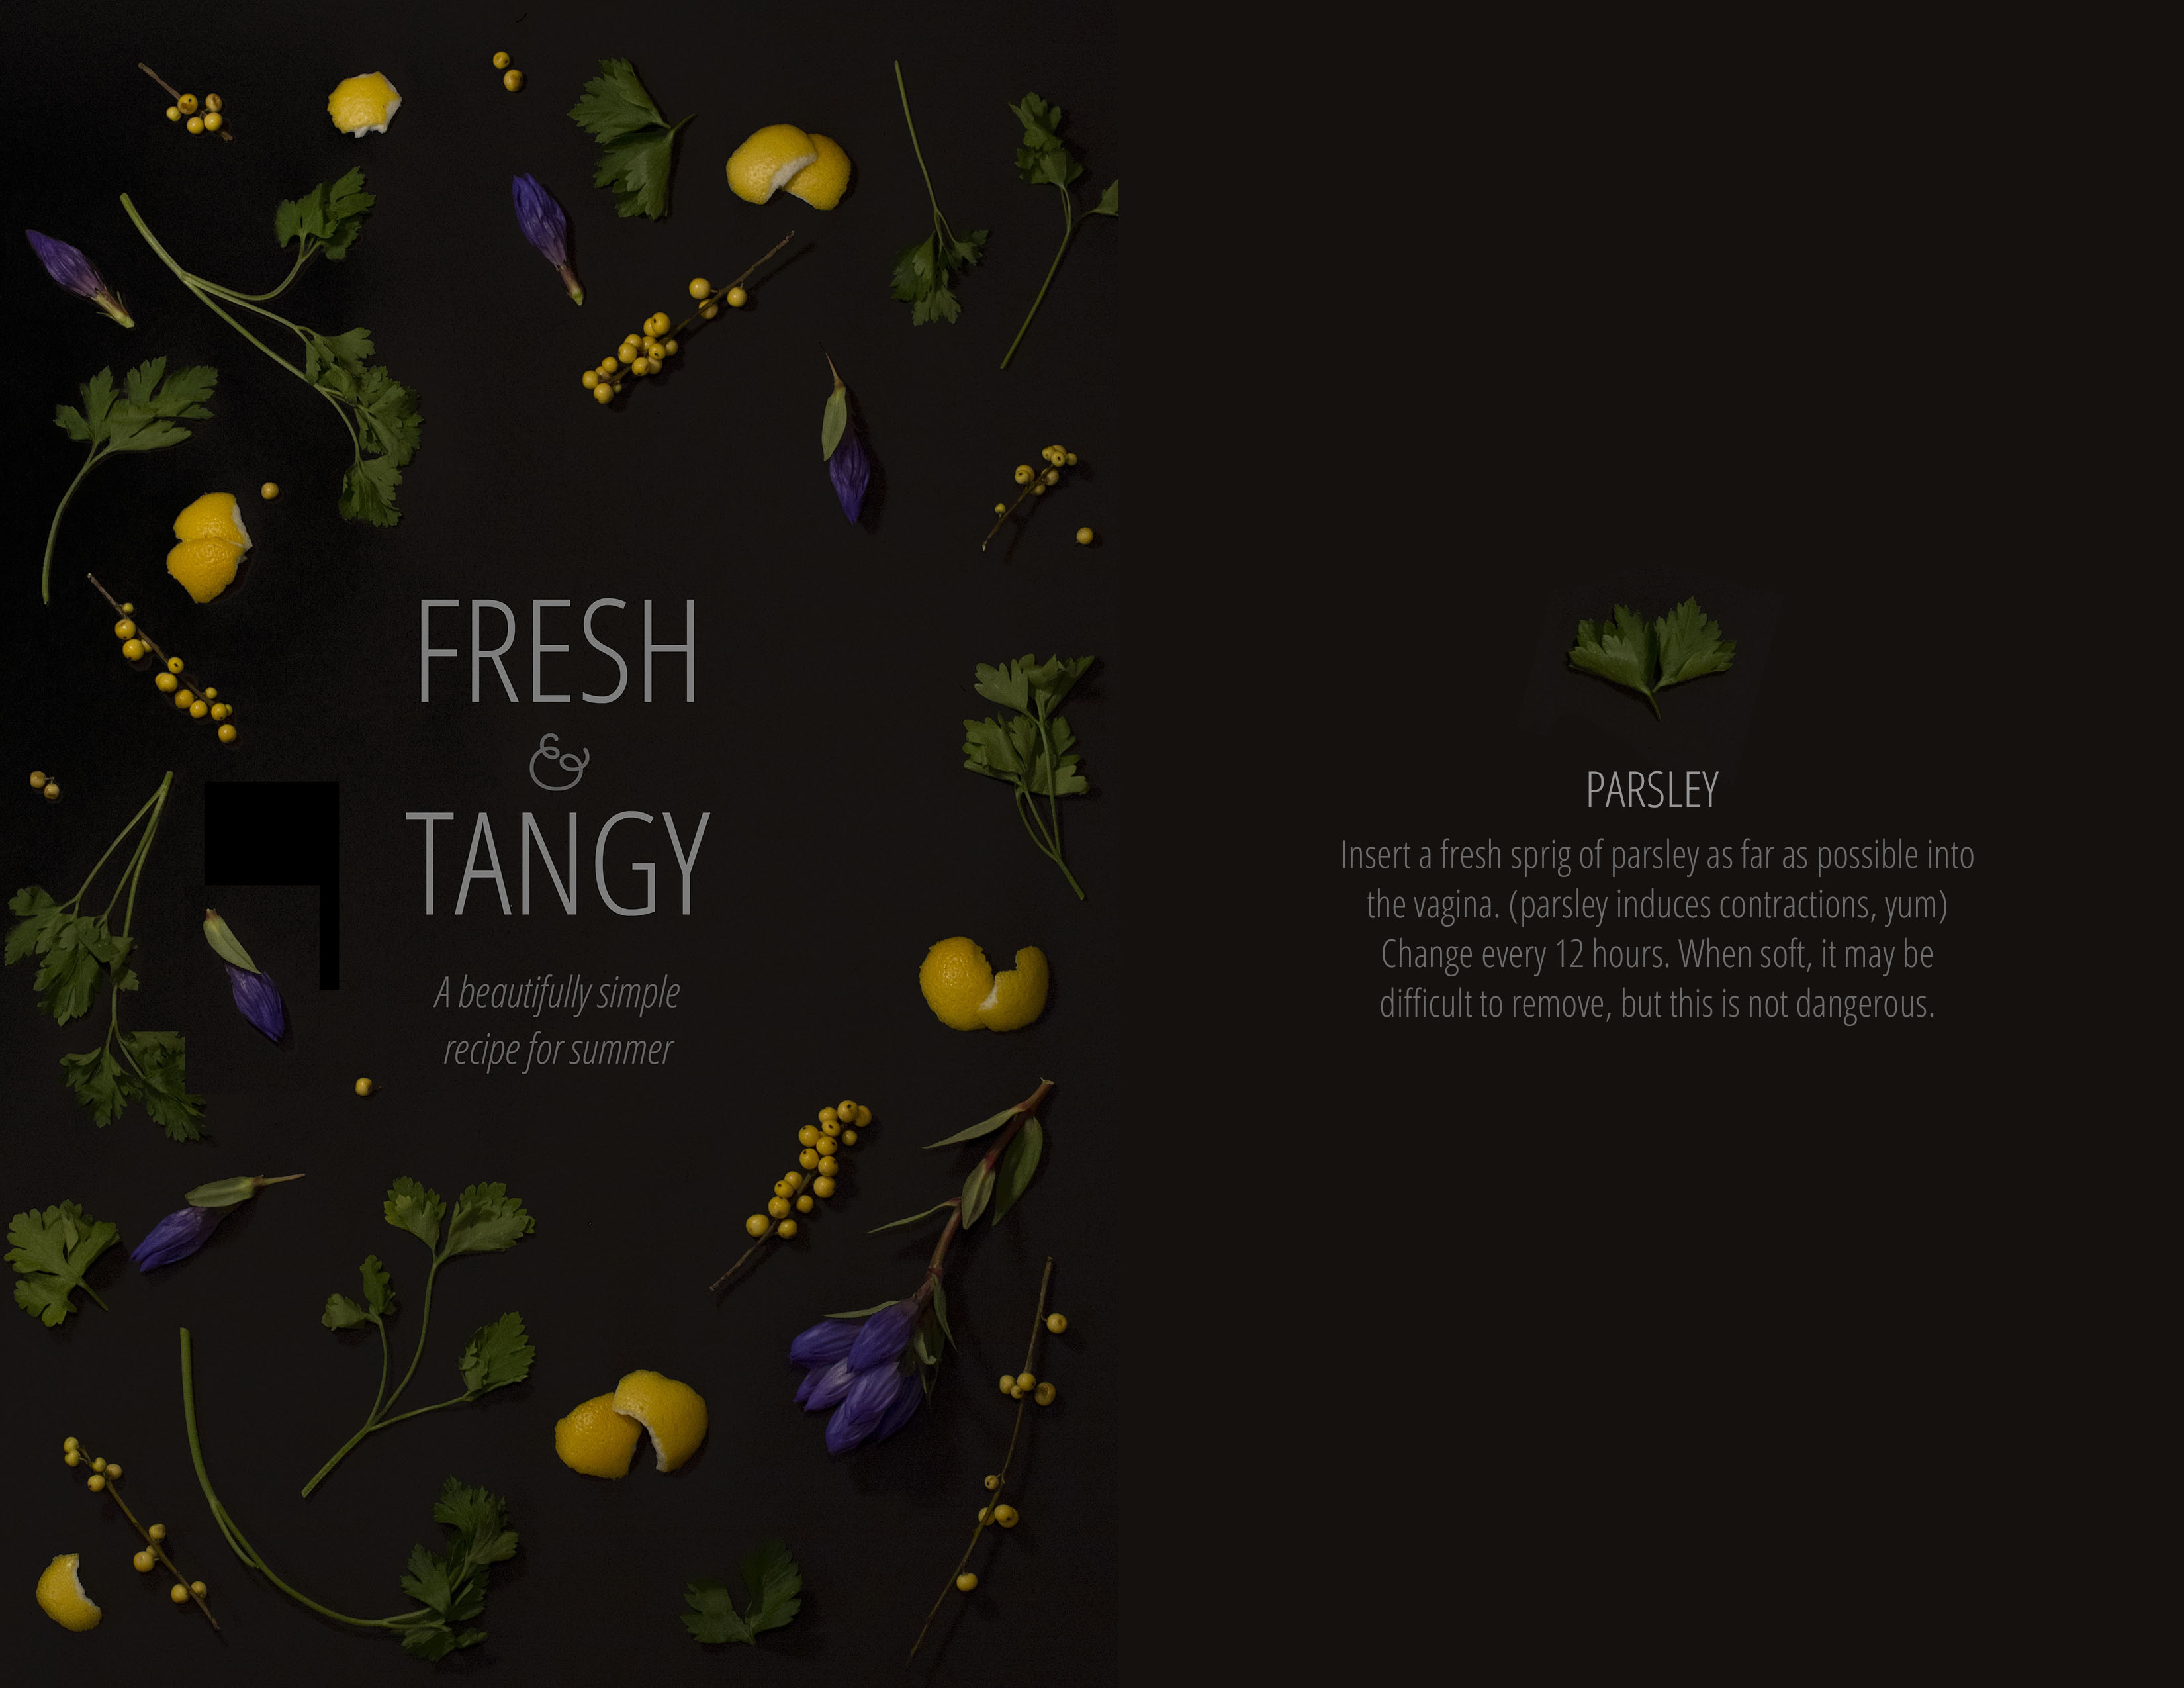 On the left is the text: Fresh & Tangy. Surrounding the text are pieces of lemon rind, parsley, purple flower buds, and yellow berries on twigs. On the right side of the spread is a single parsley leaf with text below.